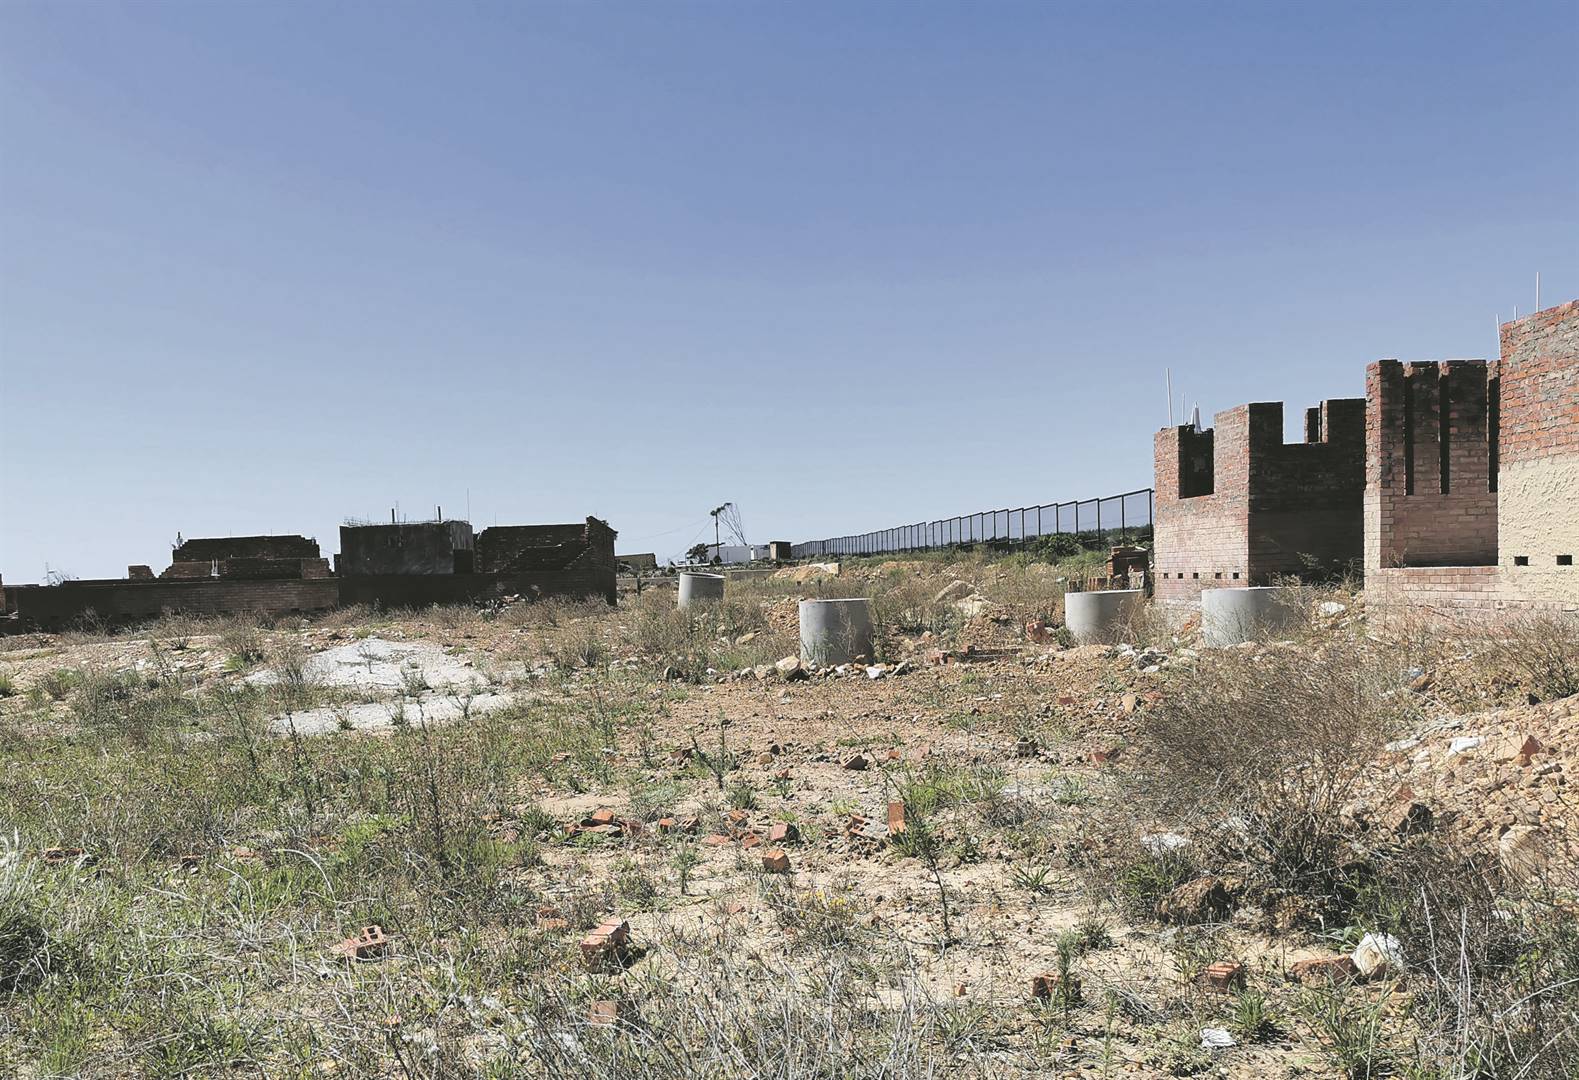 Twenty-six years after the dawn of democracy, scores of pupils are still having to learn in dire conditions in the Eastern Cape as a result of empty promises made by the provincial government. Picture: Lubabalo Ngcukana/City Press